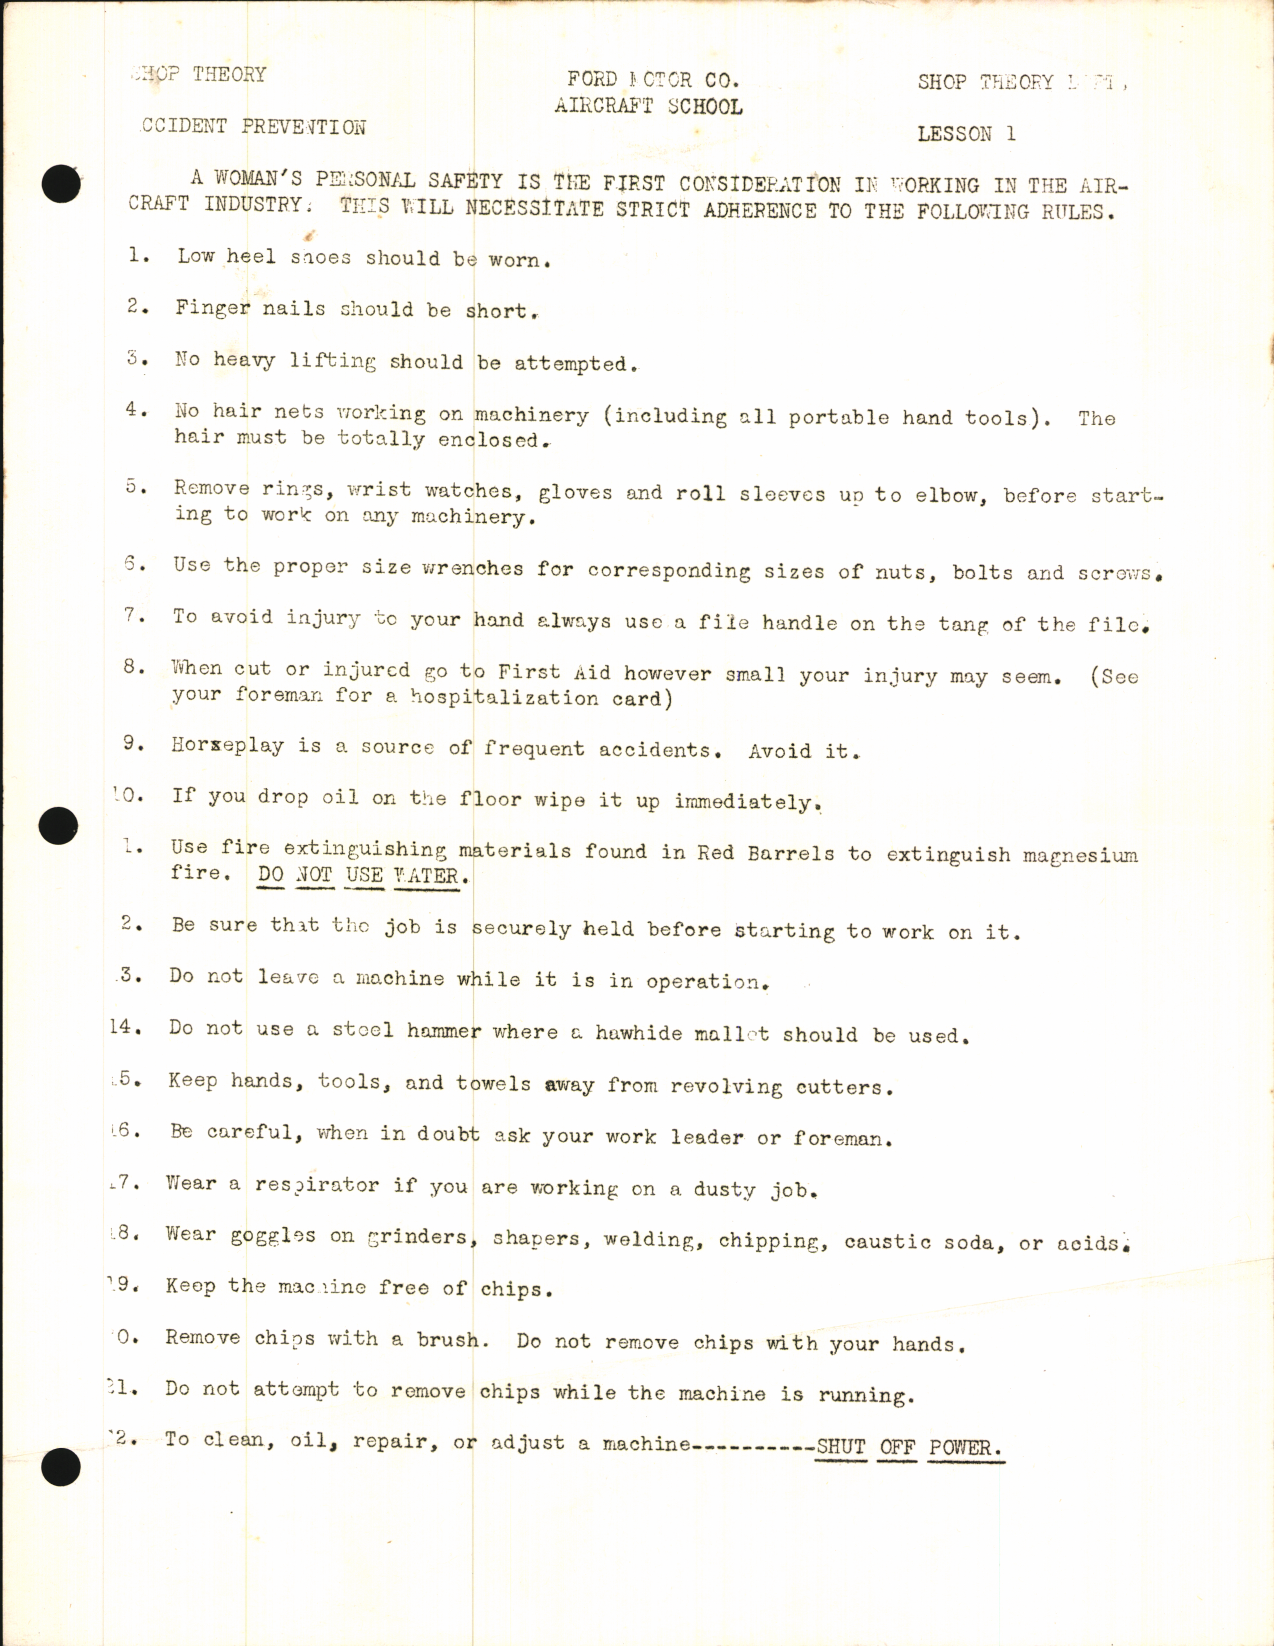 Sample page 1 from AirCorps Library document: Ford Motor Co. Aircraft School for Accident Prevention Lesson 1